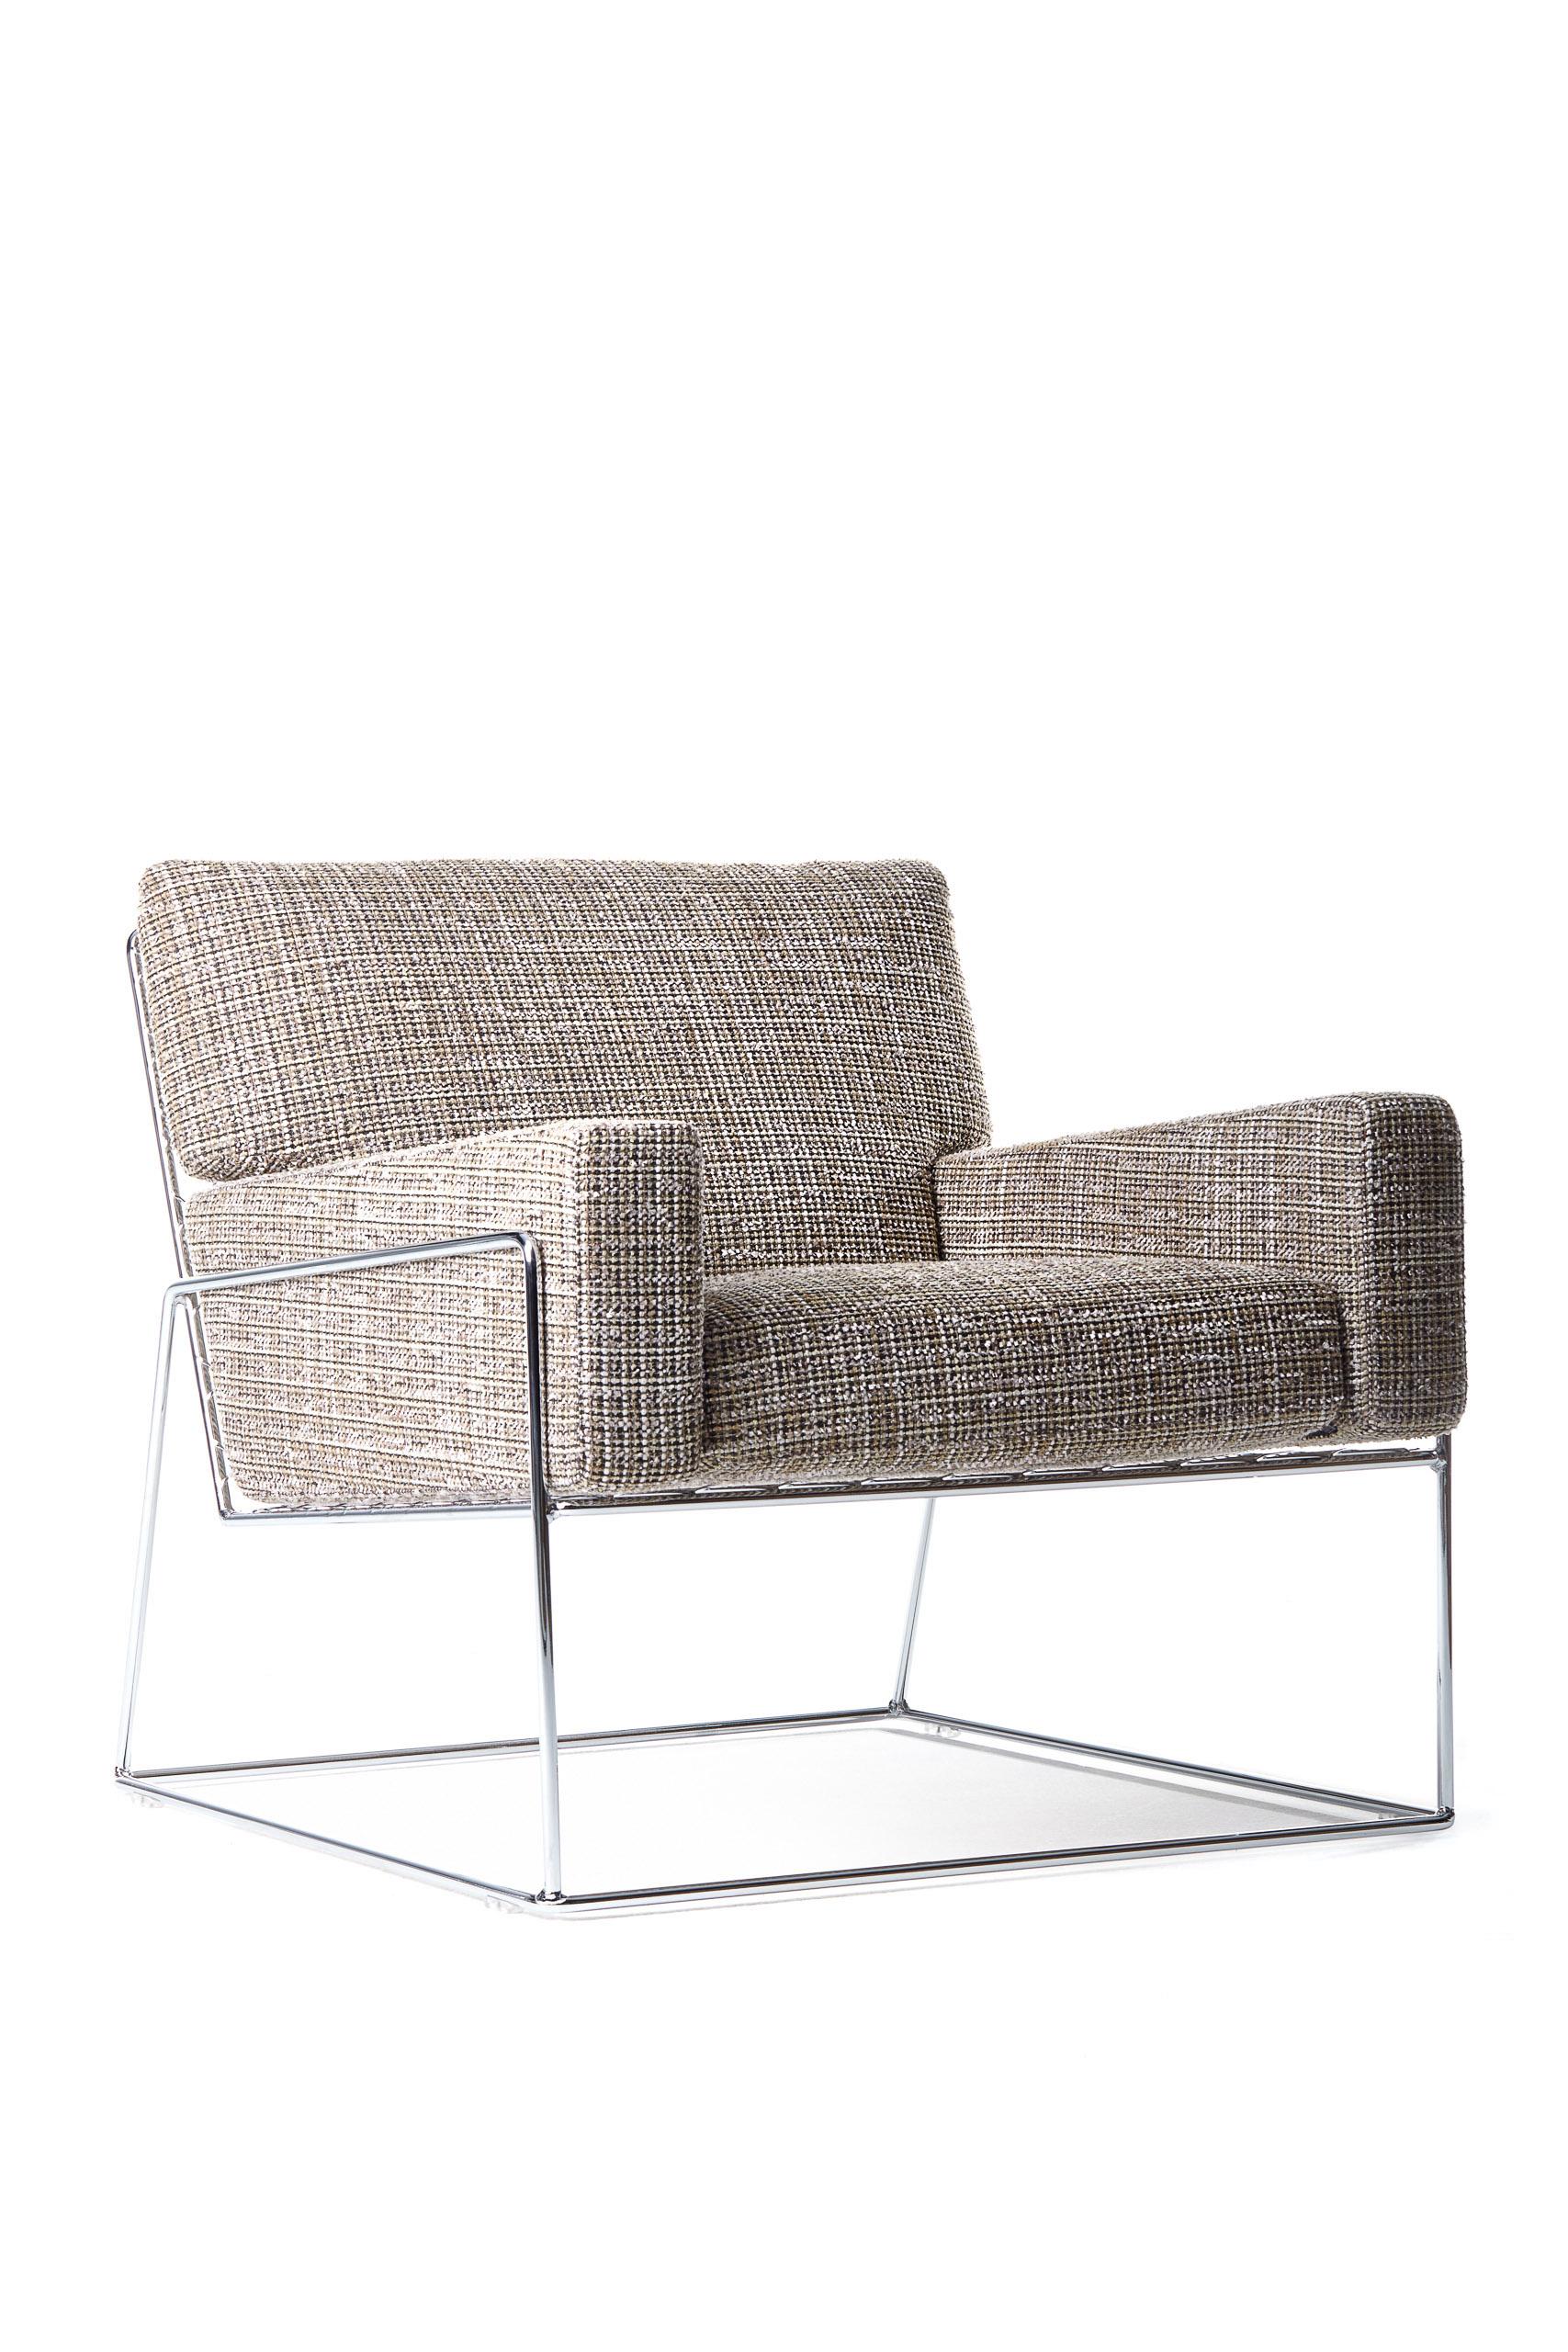 Light and elegant, soft and comfy, the Charles Chair by Marcel Wanders is a triumph of geometrical forms that interact to create a harmonious silhouette, in which the seat is marginally tilted backward by the long-legged frame. This slightly